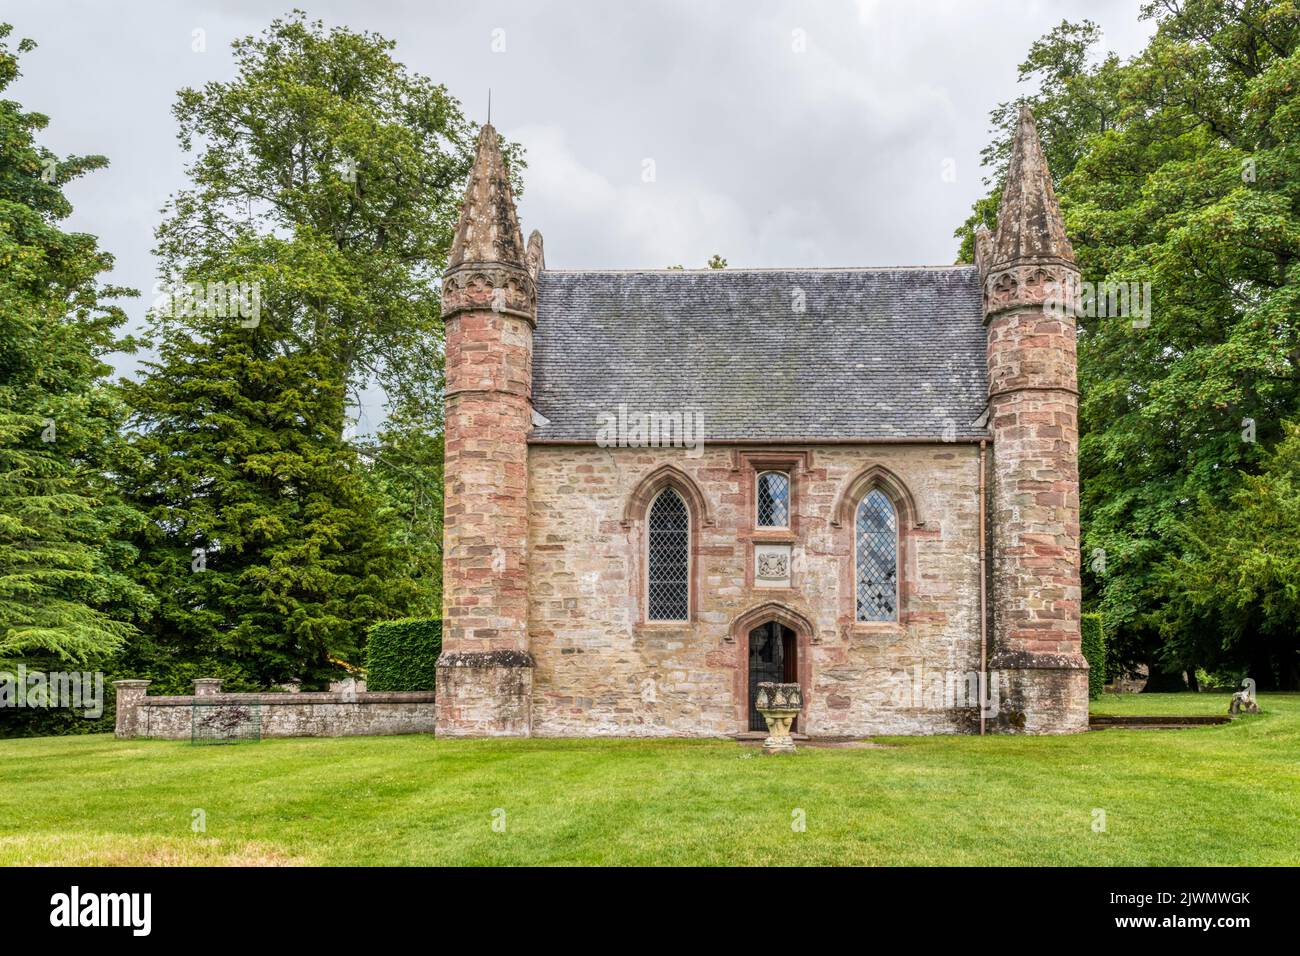 Chapel in the grounds of Scone Palace, where Kings of Scotland were crowned until 1296. Stock Photo